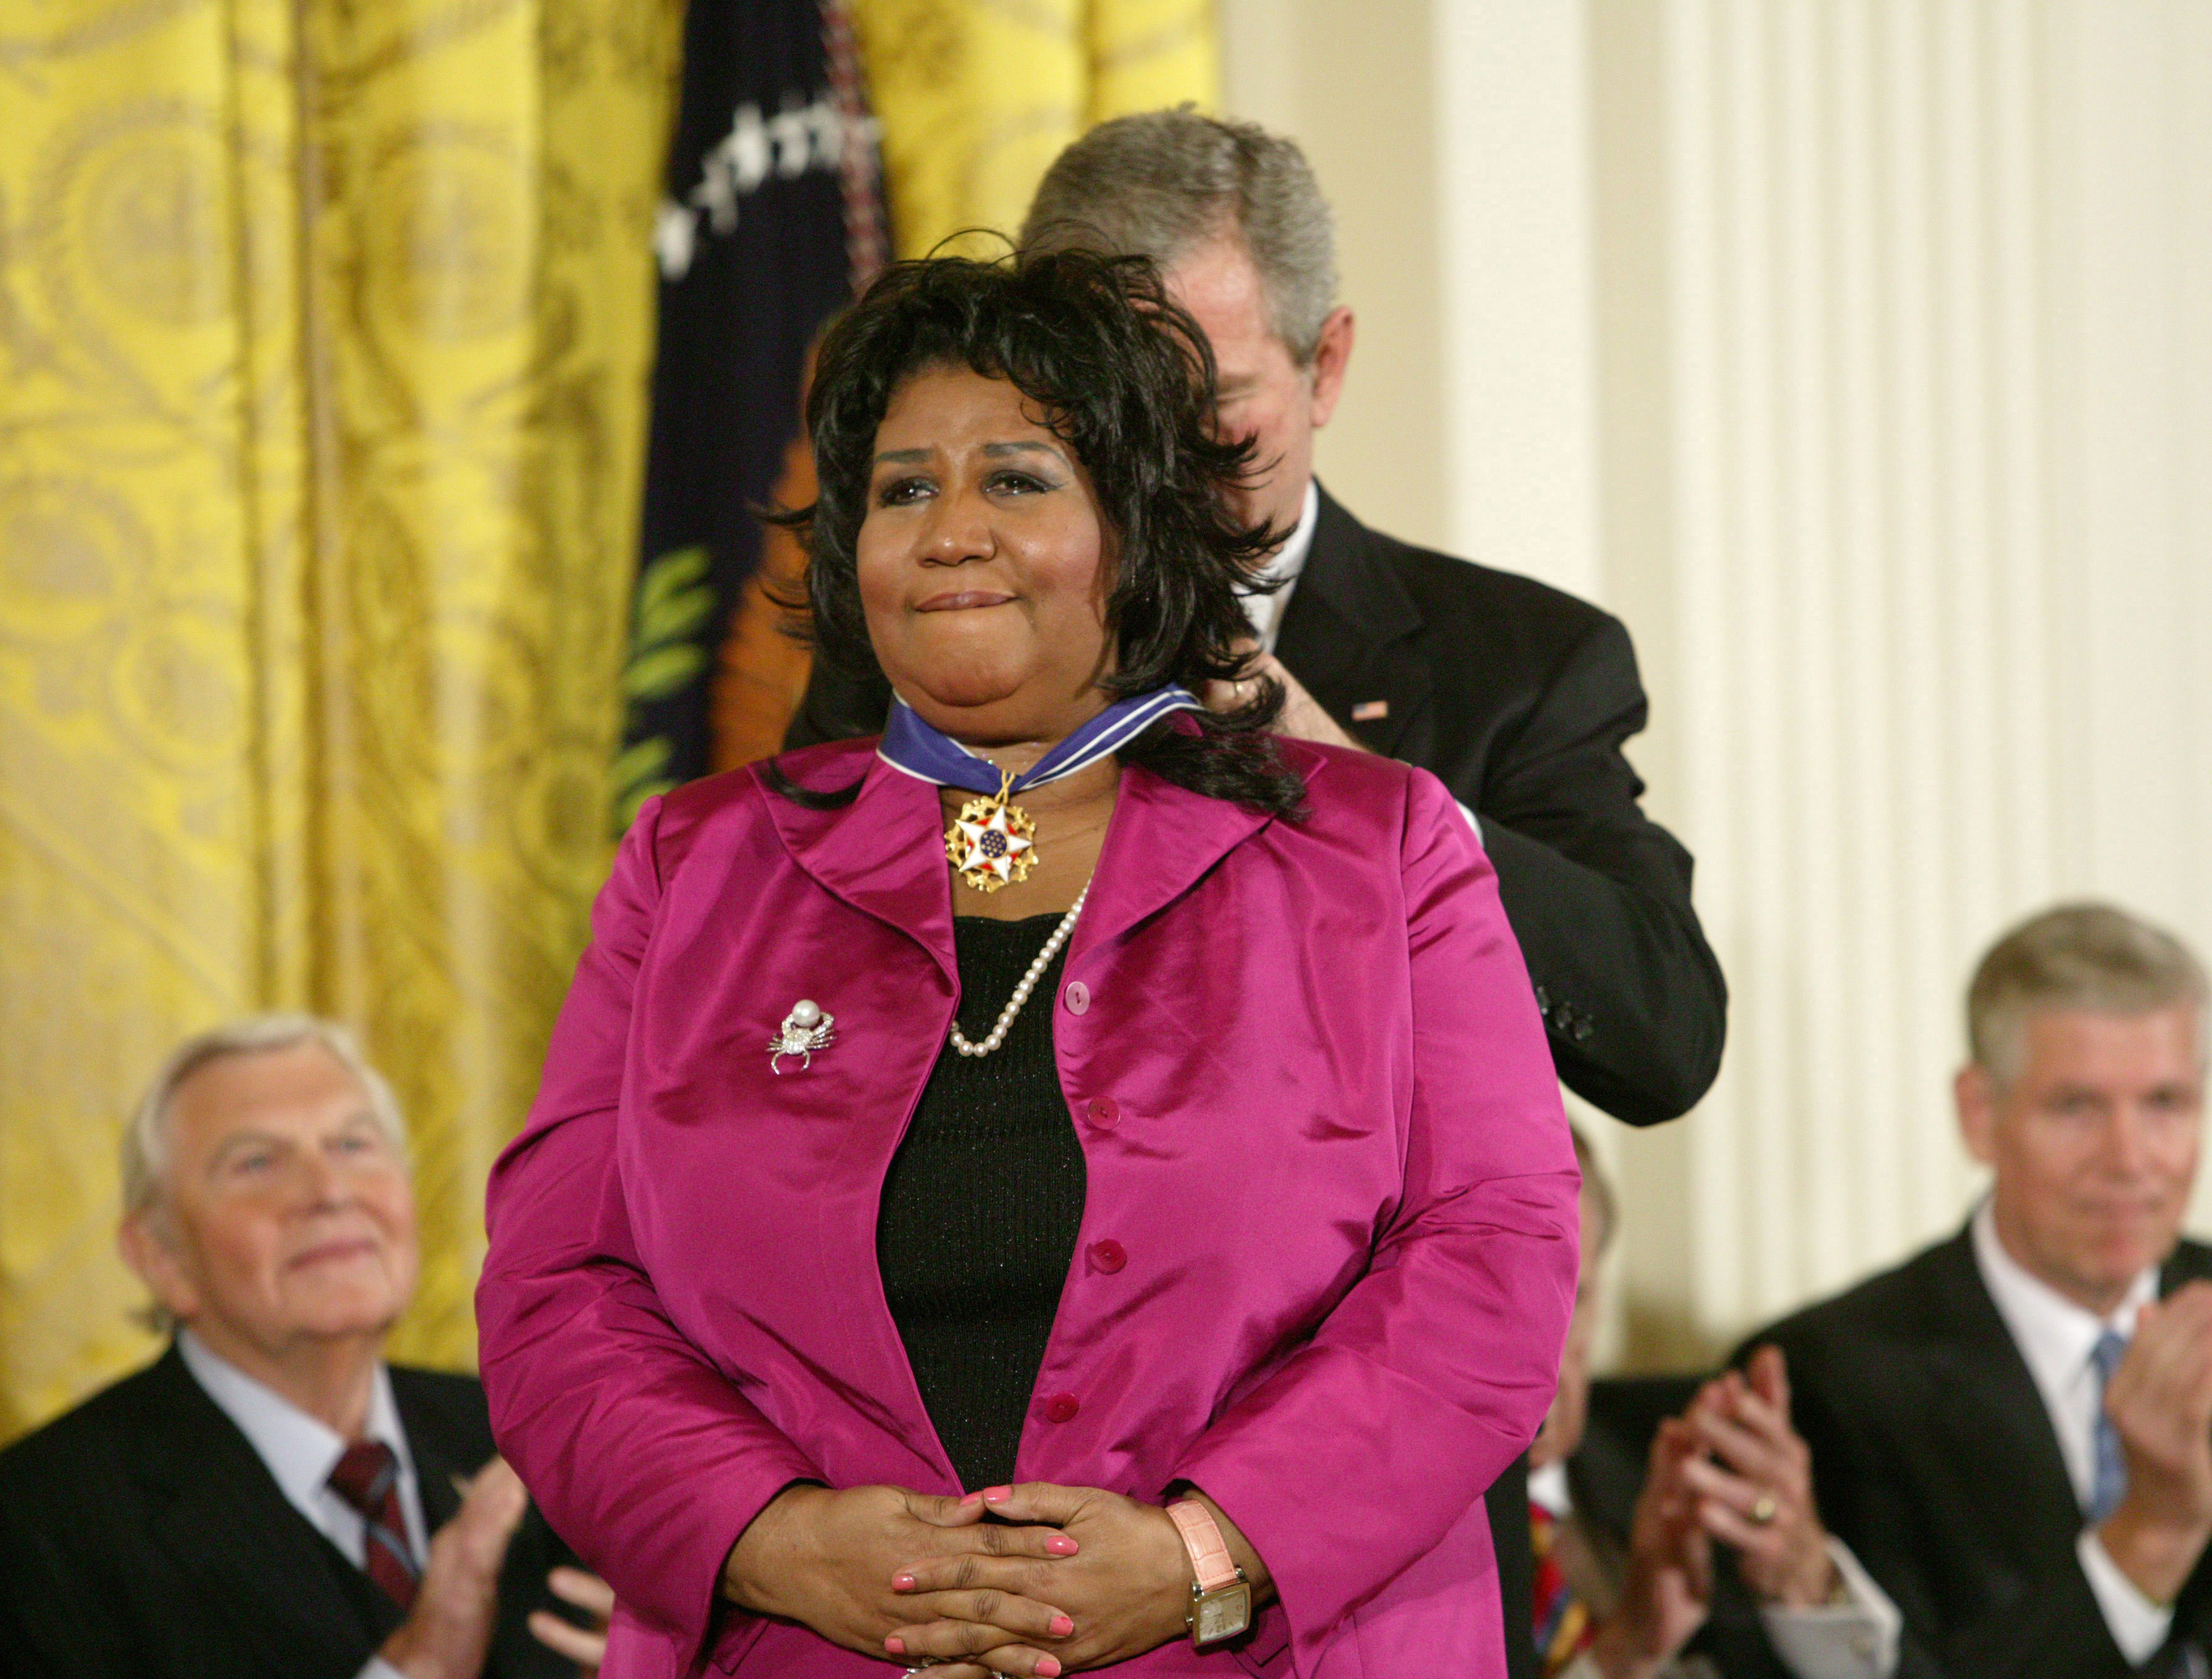 President George W. Bush presents Aretha Franklin with the 2005 Presidential Medal of Freedom at the White House in Washington D.C. on Nov. 9, 2005. (Douglas A. Sonders—Getty Images)